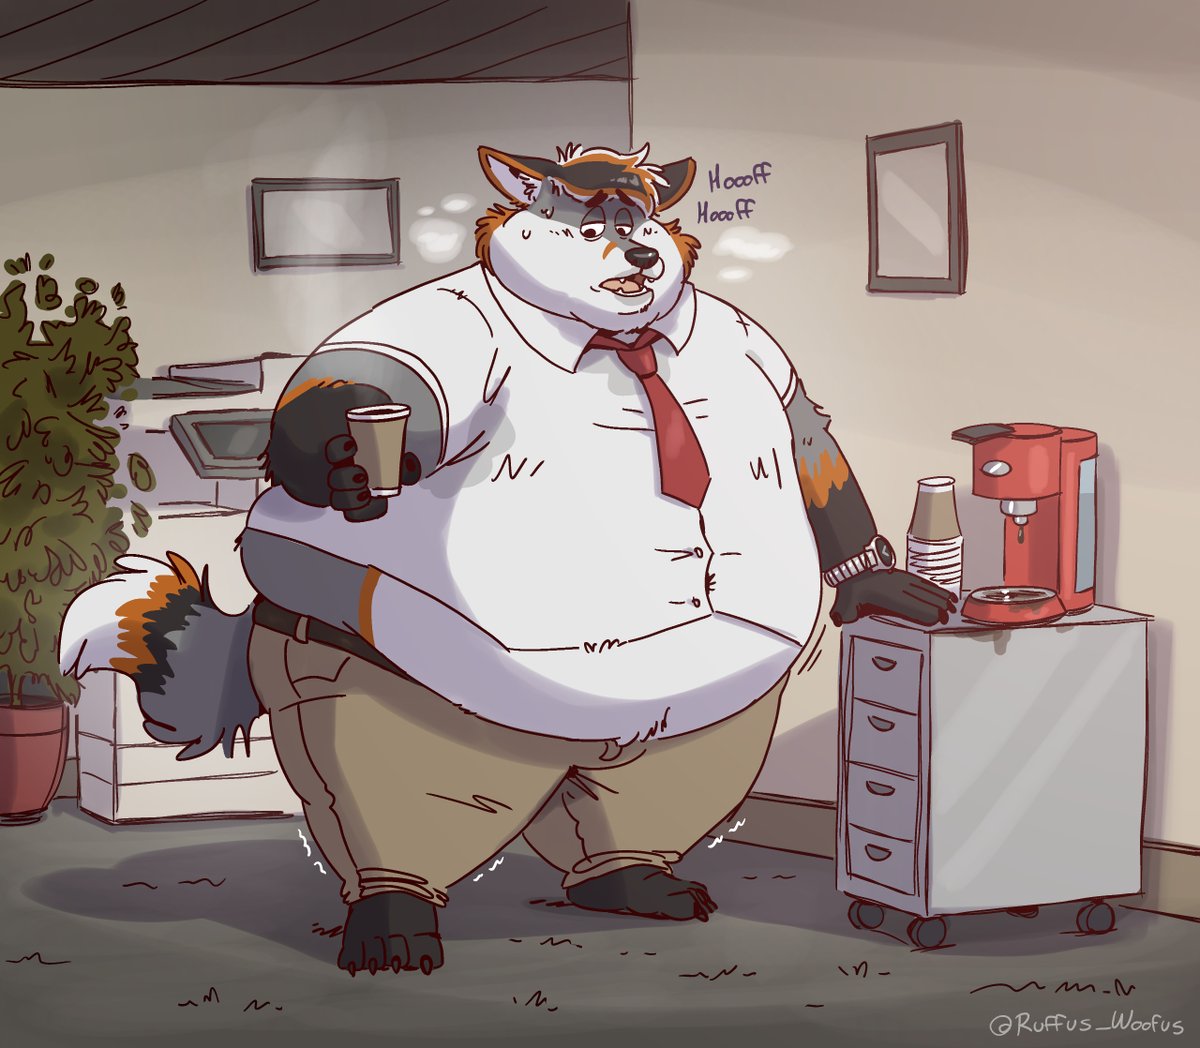 That break room just seems to get farther and farther away. I wonder why? 🖼️ by @Ruffus_Woofus #fatfur #fatfurry Inspired by real events at work.